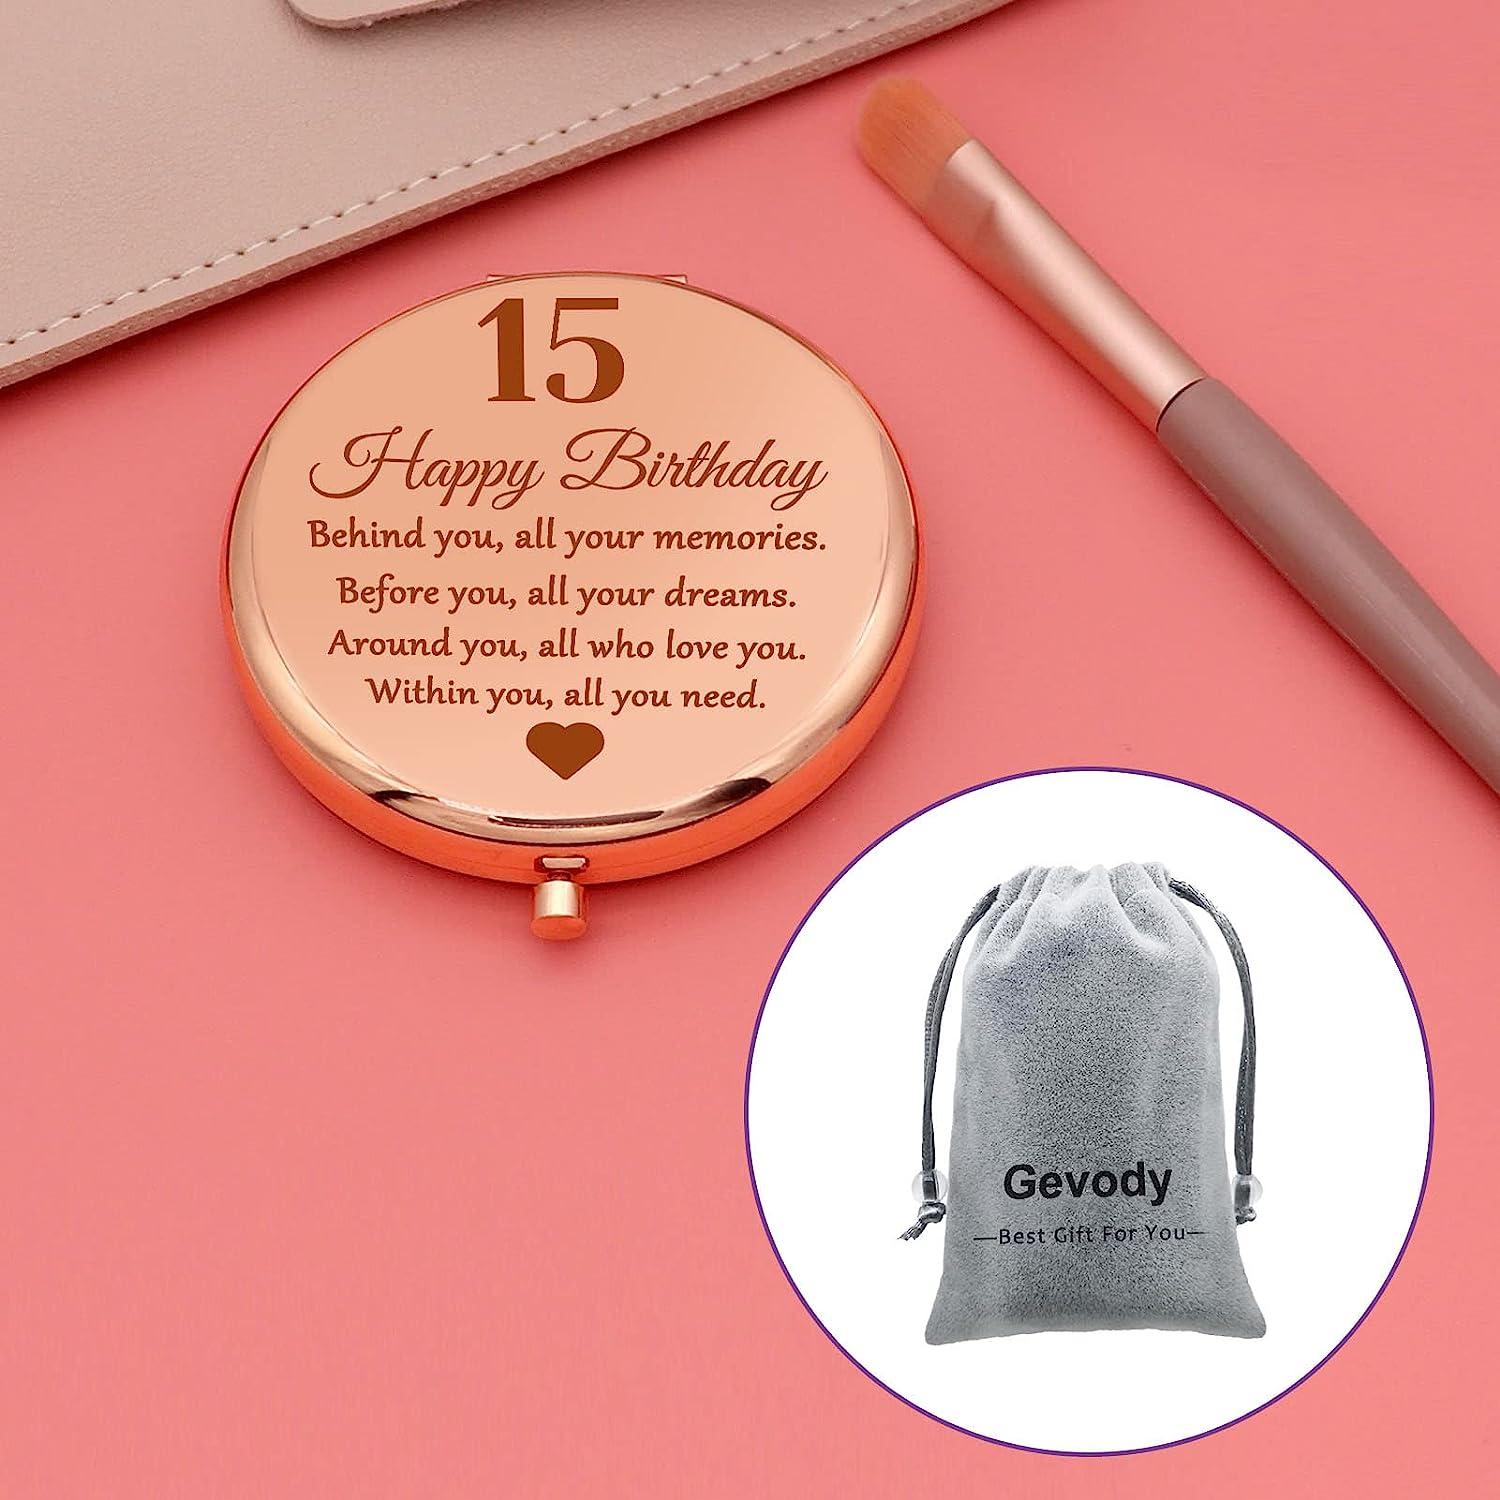 15 Gifts Your Sister Will Love this Holiday Season